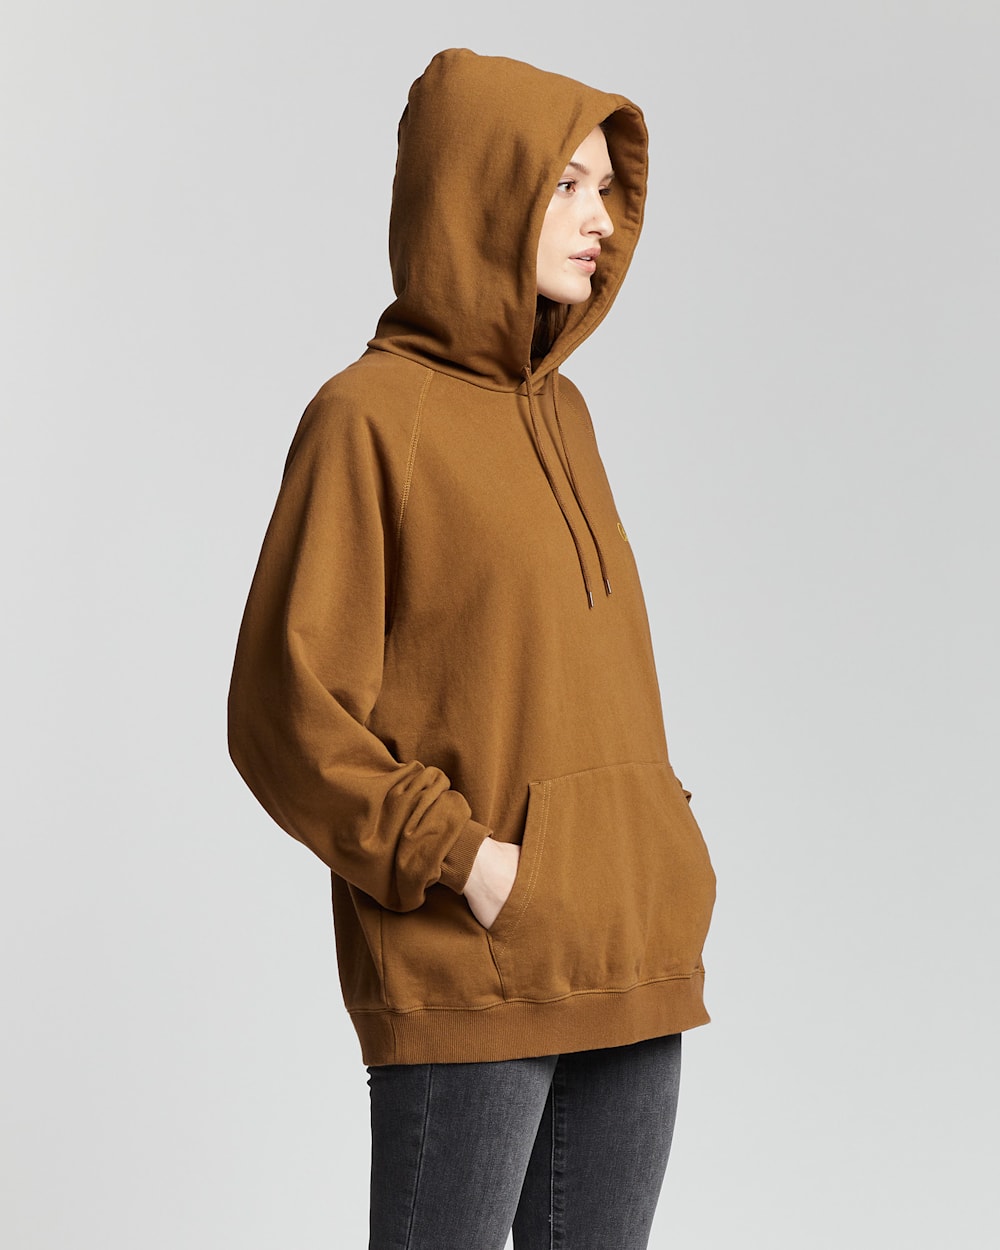 ALTERNATE VIEW OF LIMITED EDITION HOODIE IN TAN HARDING image number 3